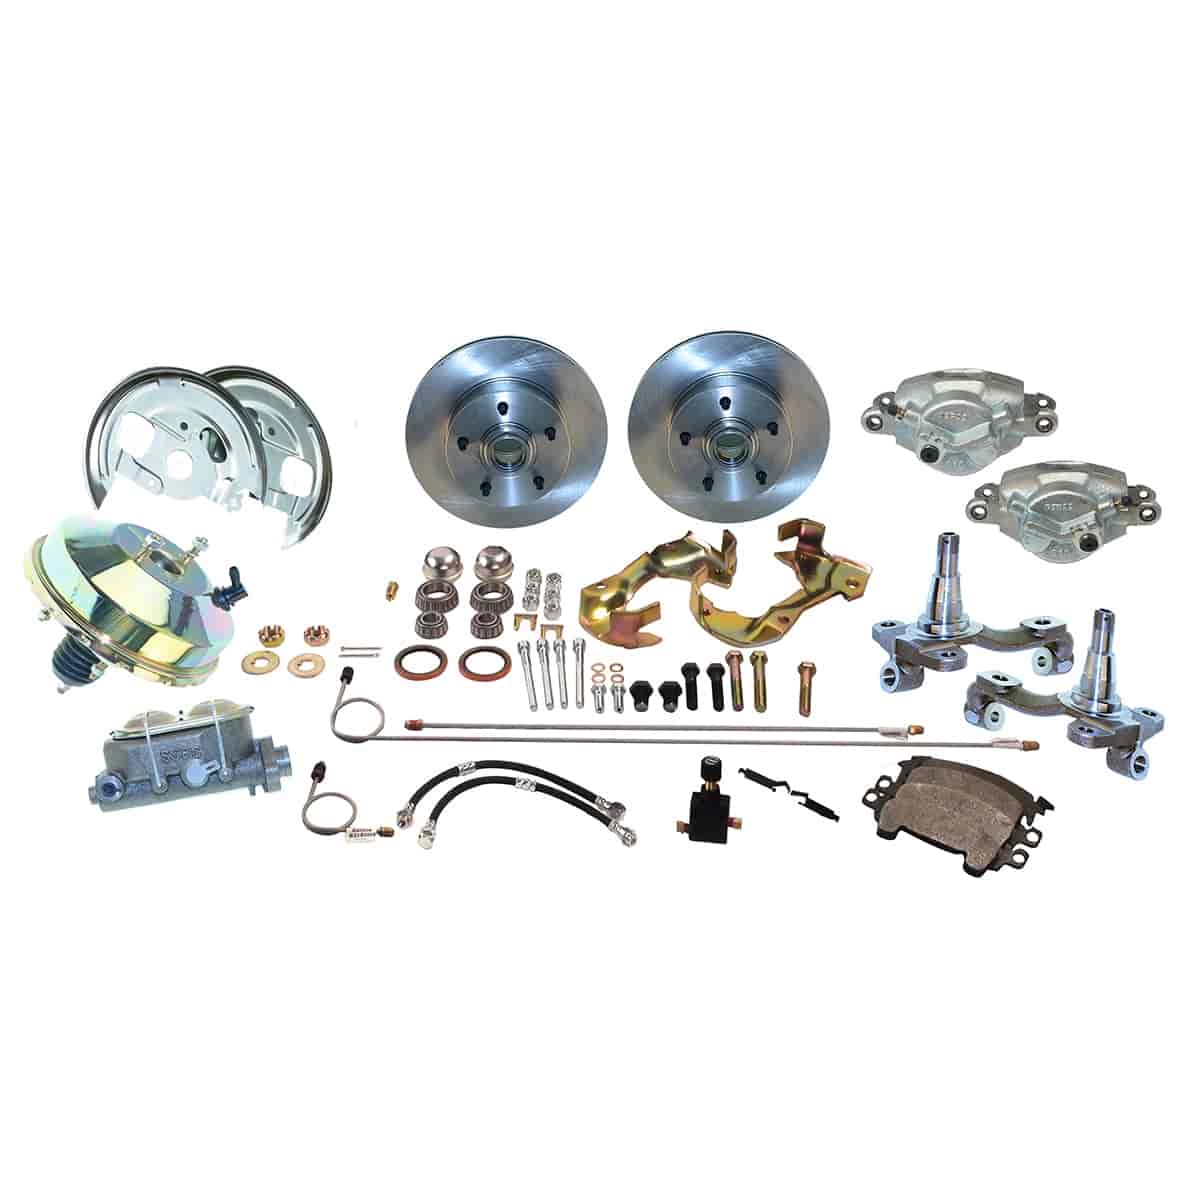 Front Drum-to-Disc Brake Conversion Kit 1962-67 Chevrolet Nova and Chevy II